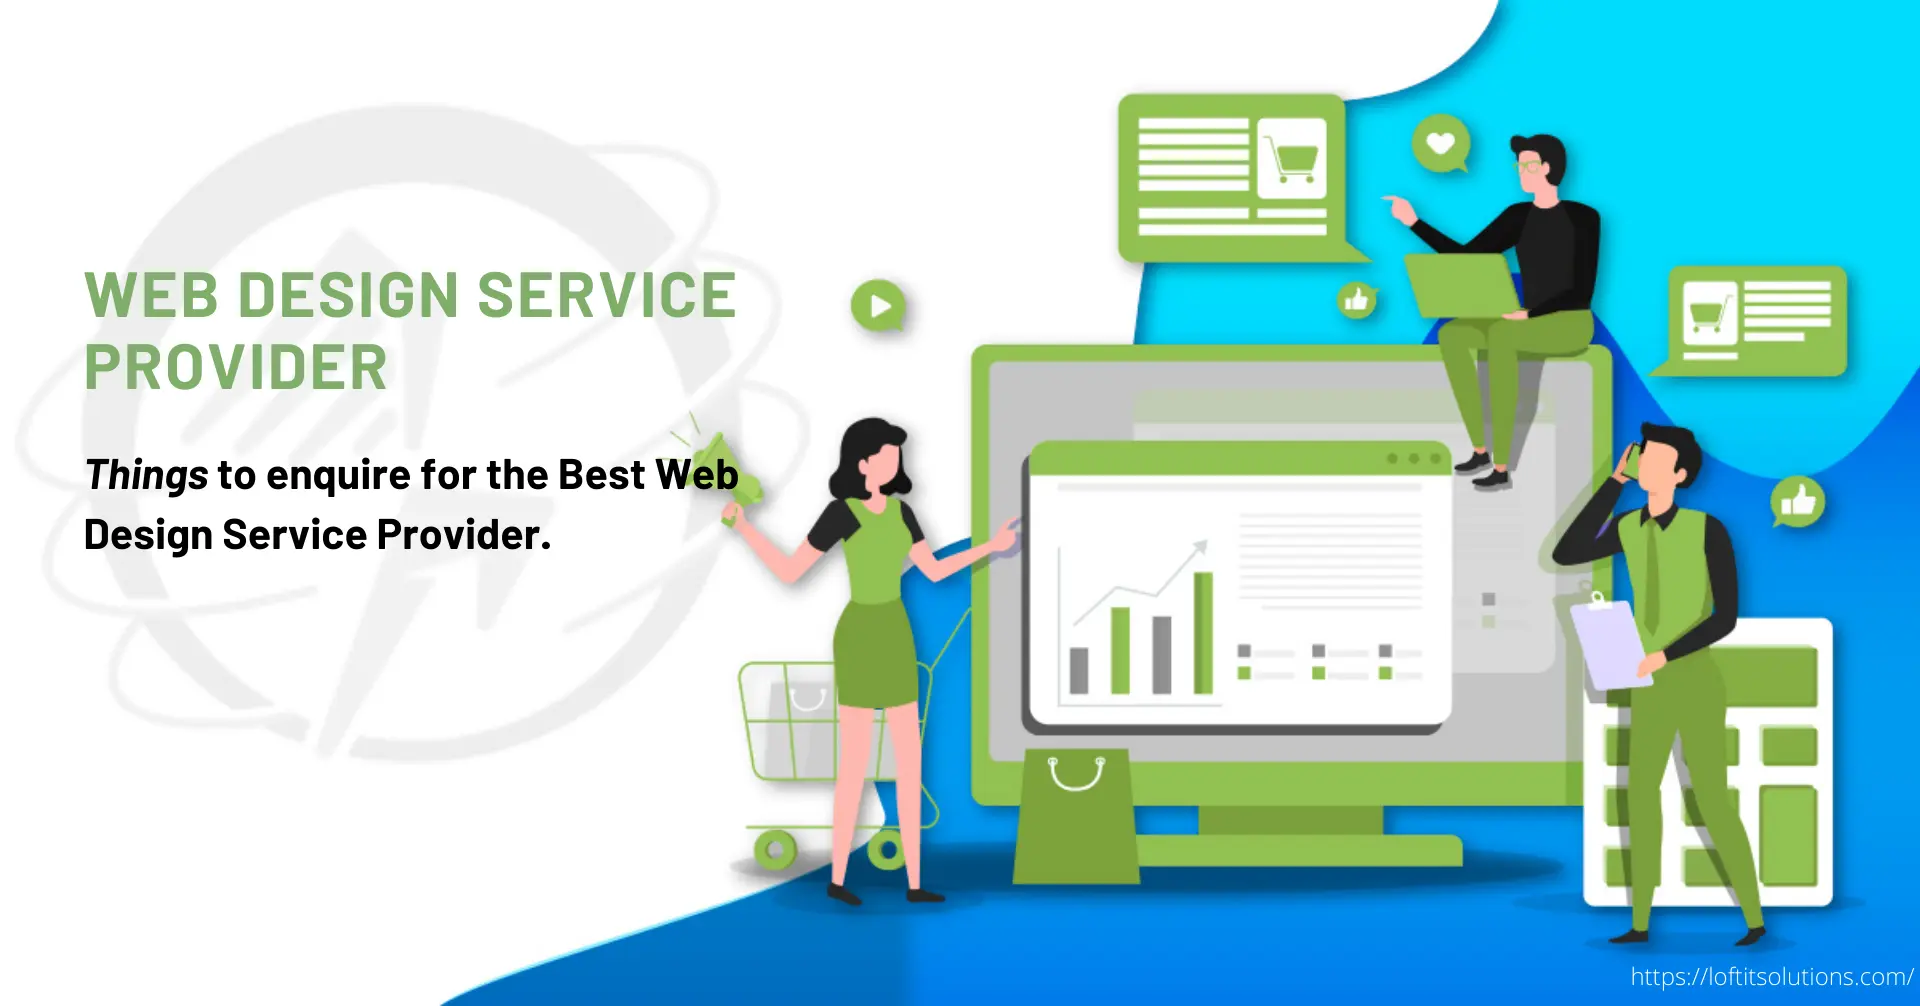 Things to Enquire for the Best Web Design Service Provider